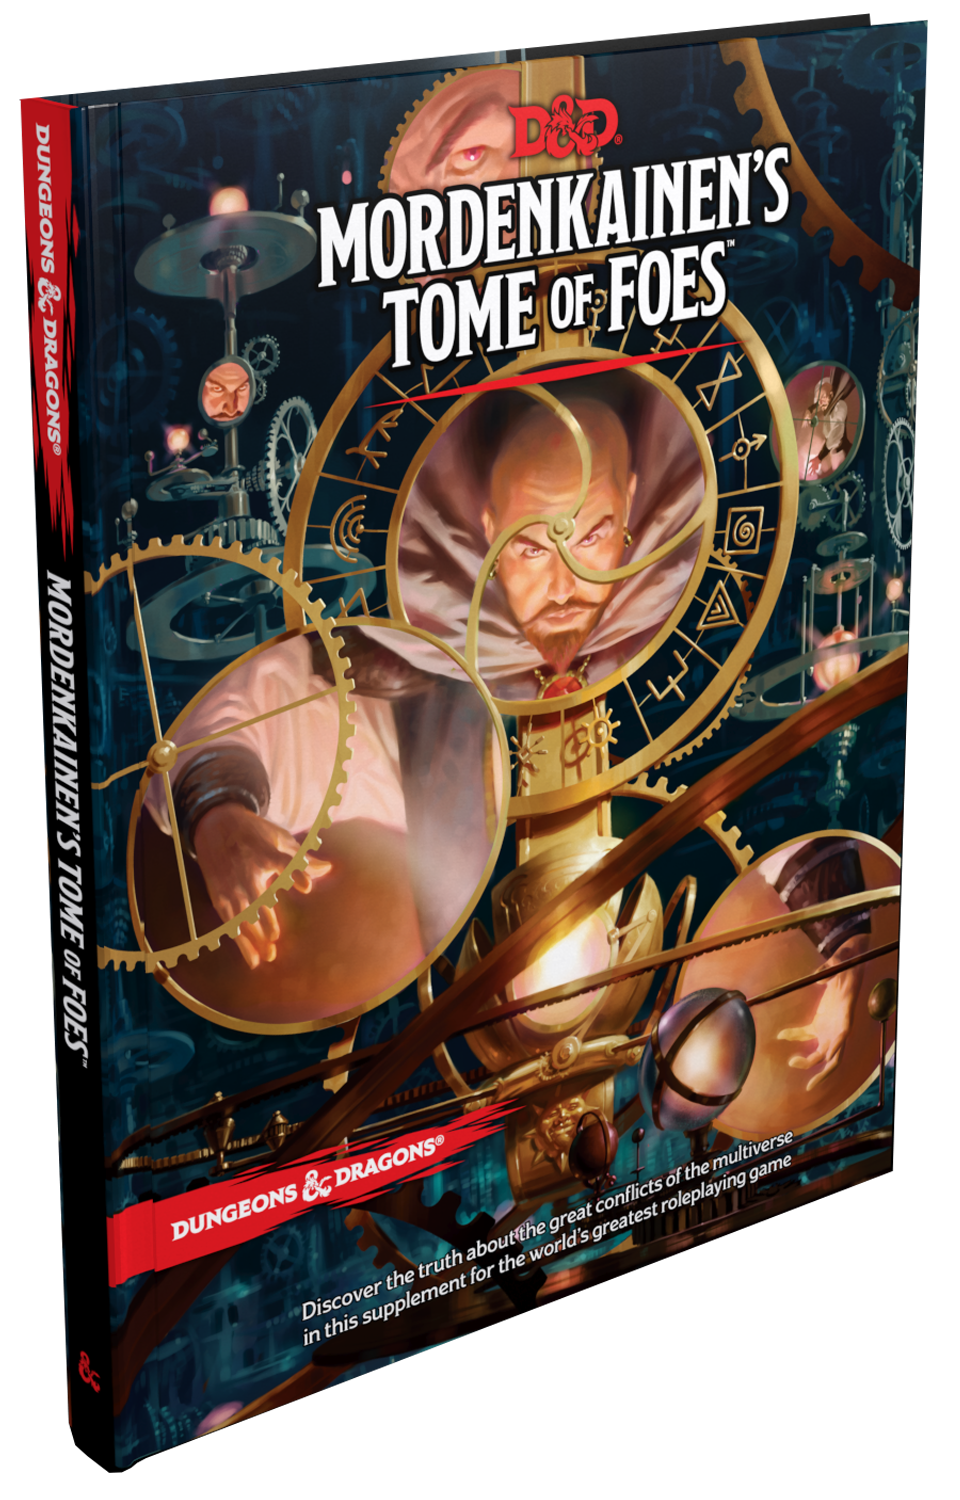 Dungeons & Dragons 5th edition - Mordenkainen's Tome of Foes